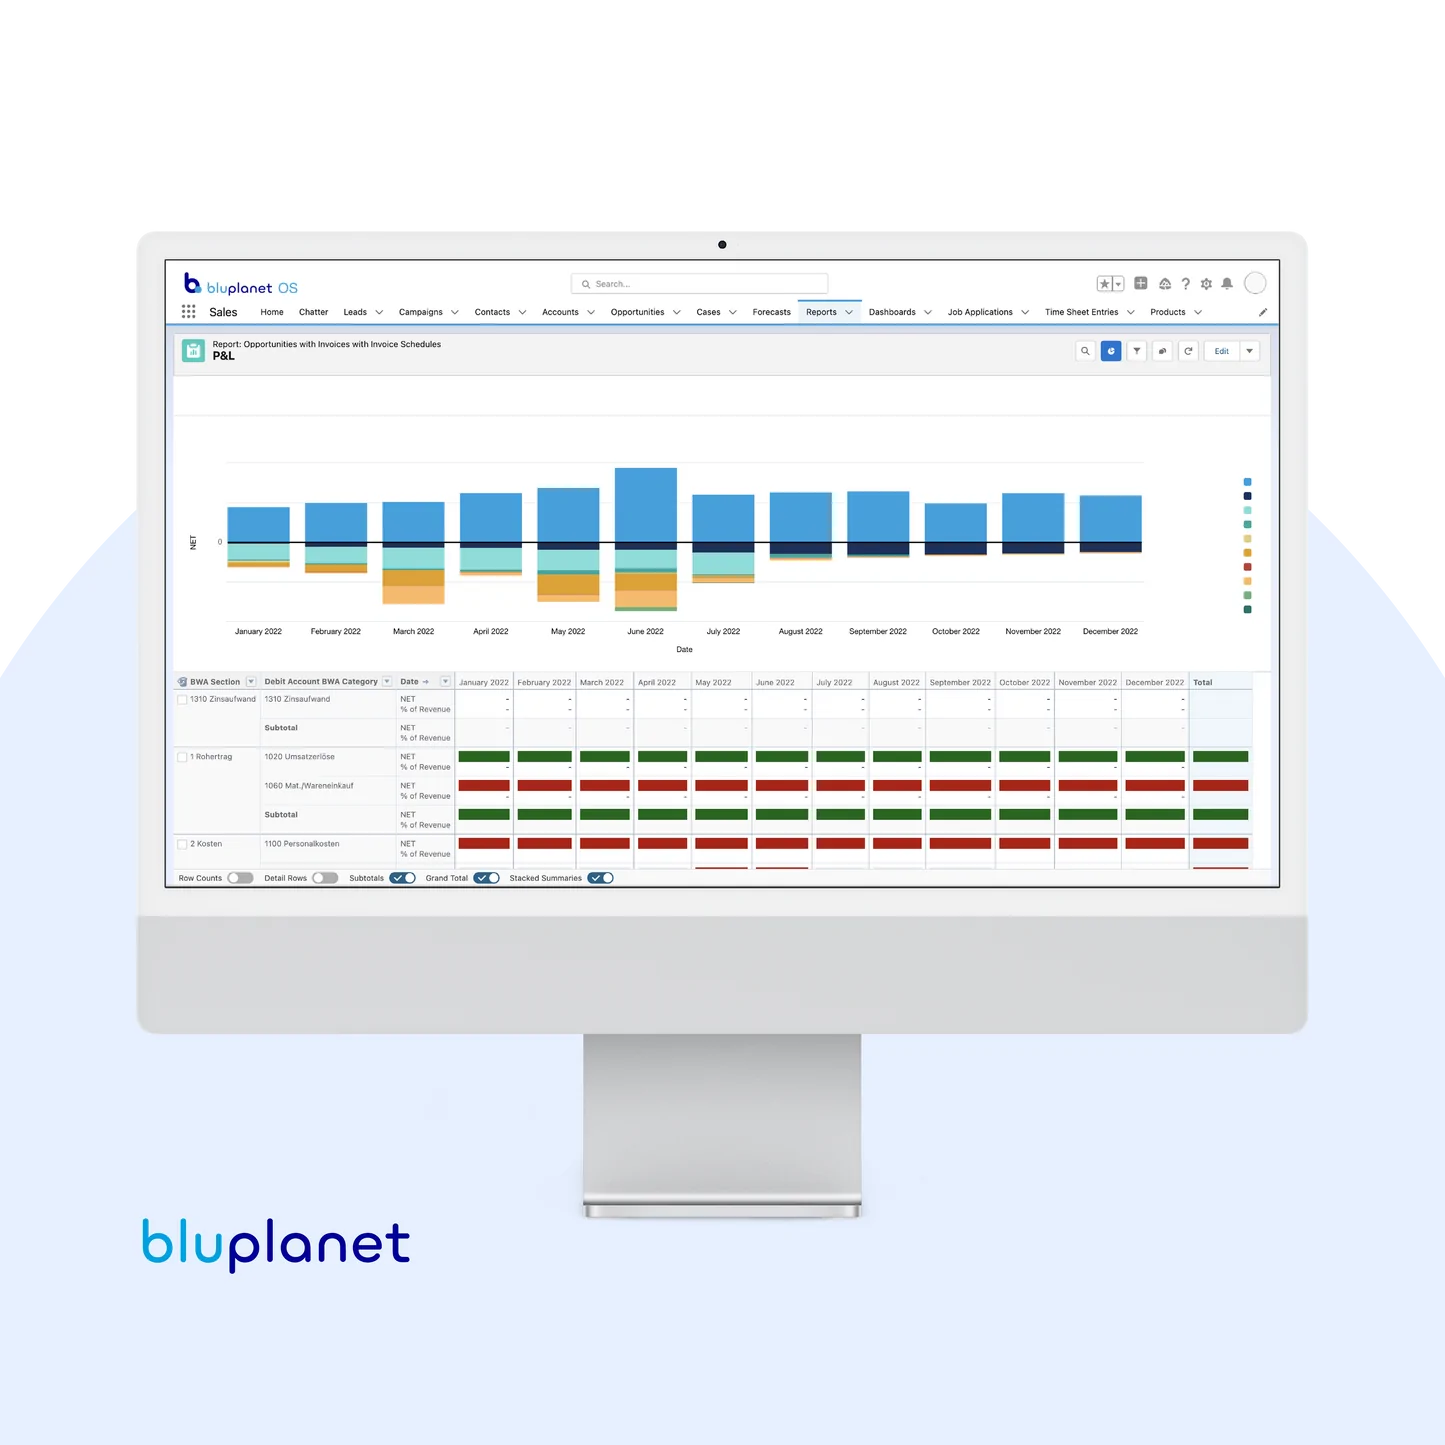 bluplanet OS: Salesforce Add-on (ATS + Finance + Prof. Services)